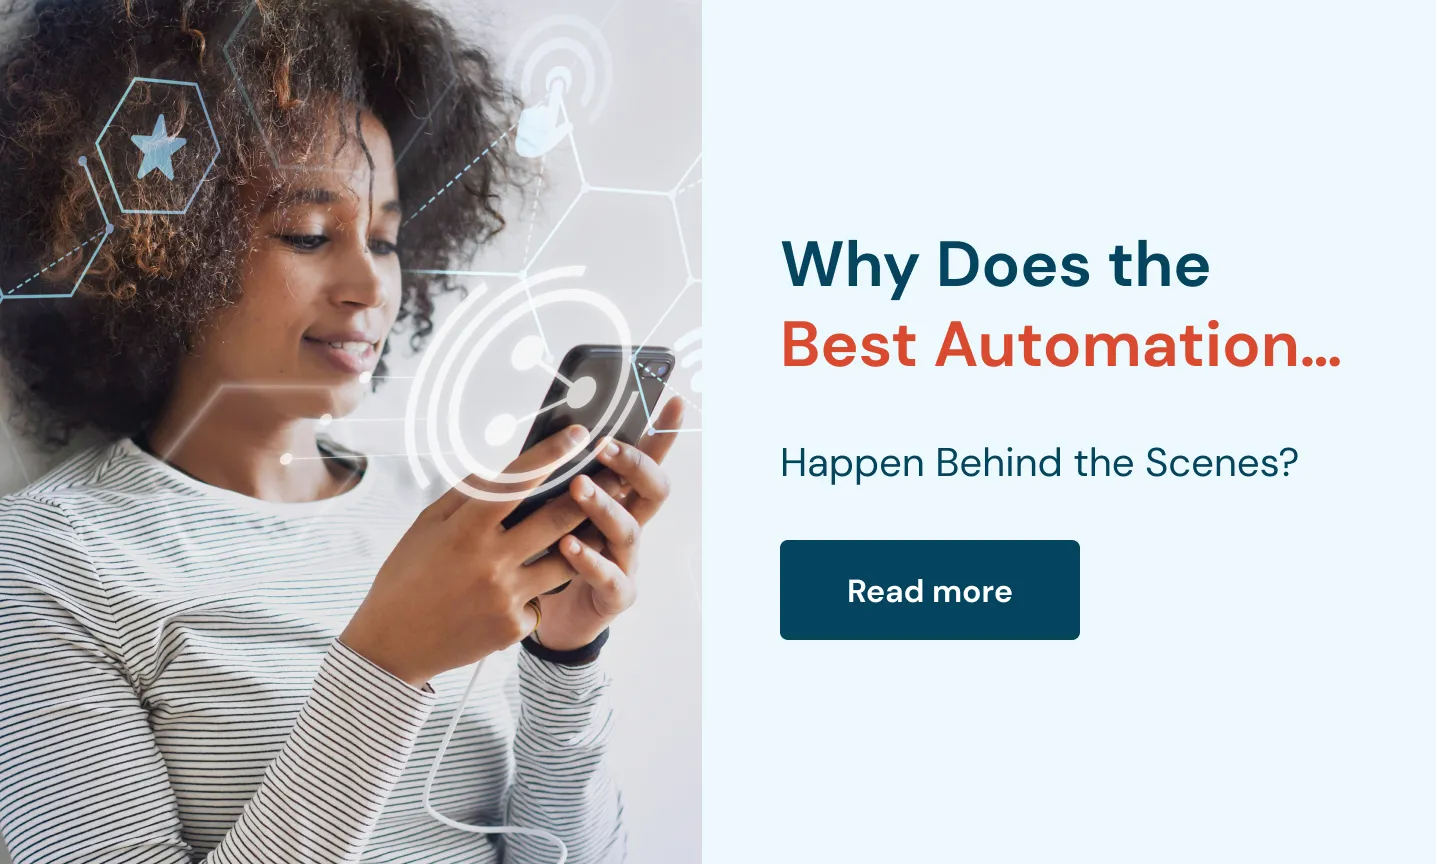 Why Does the Best Automation...